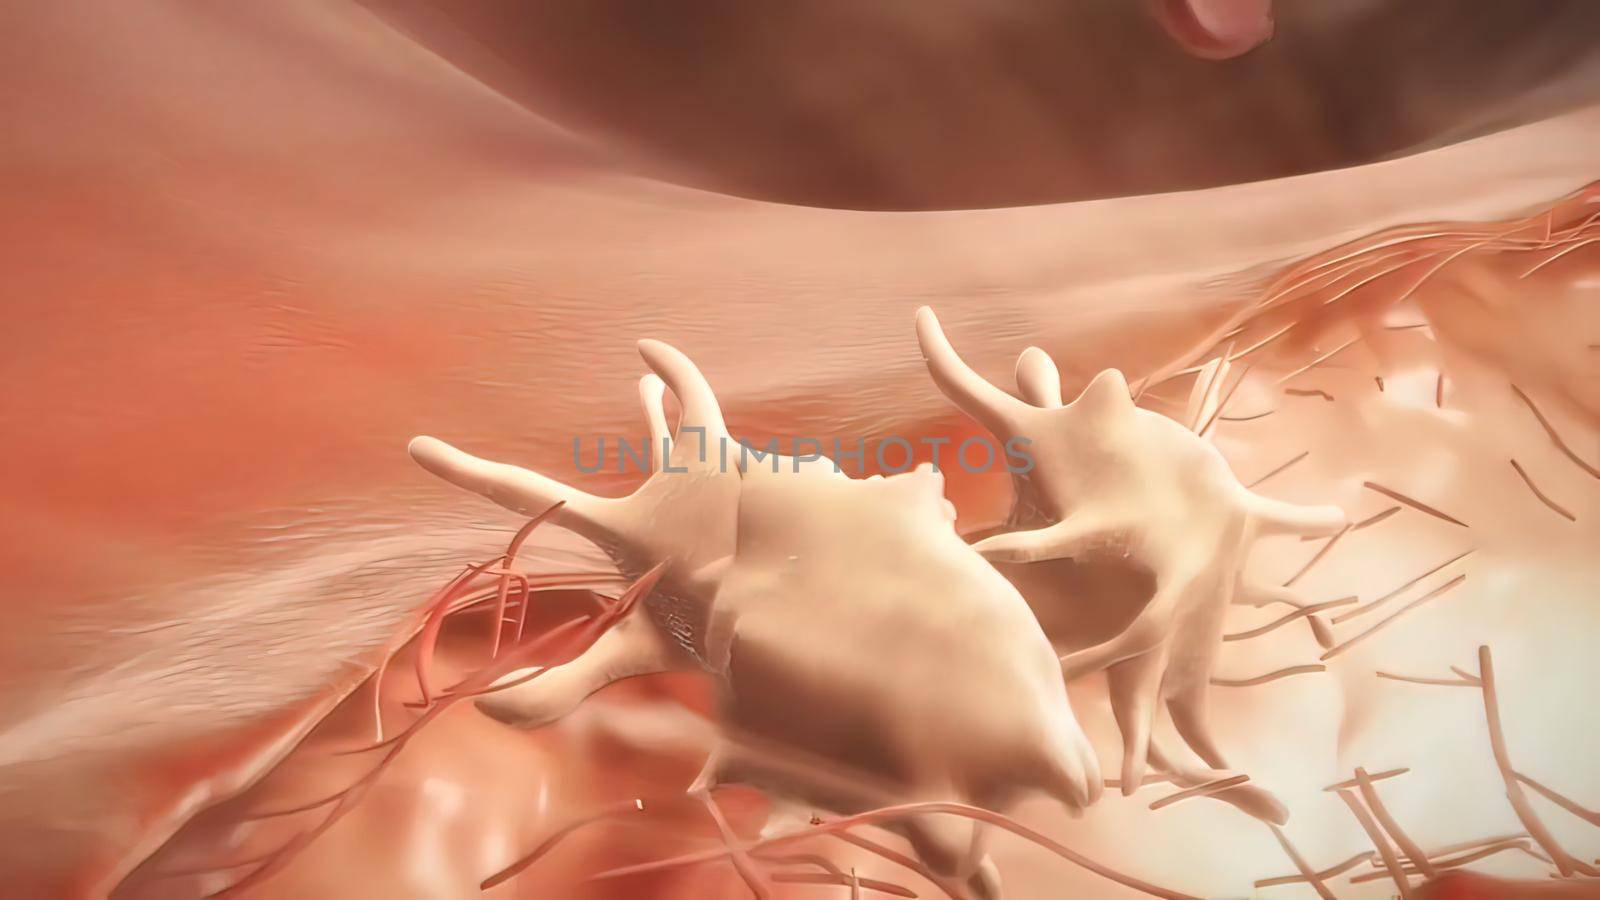 Hemophilia is usually an inherited bleeding disorder in which the blood does not clot properly 3D illustration